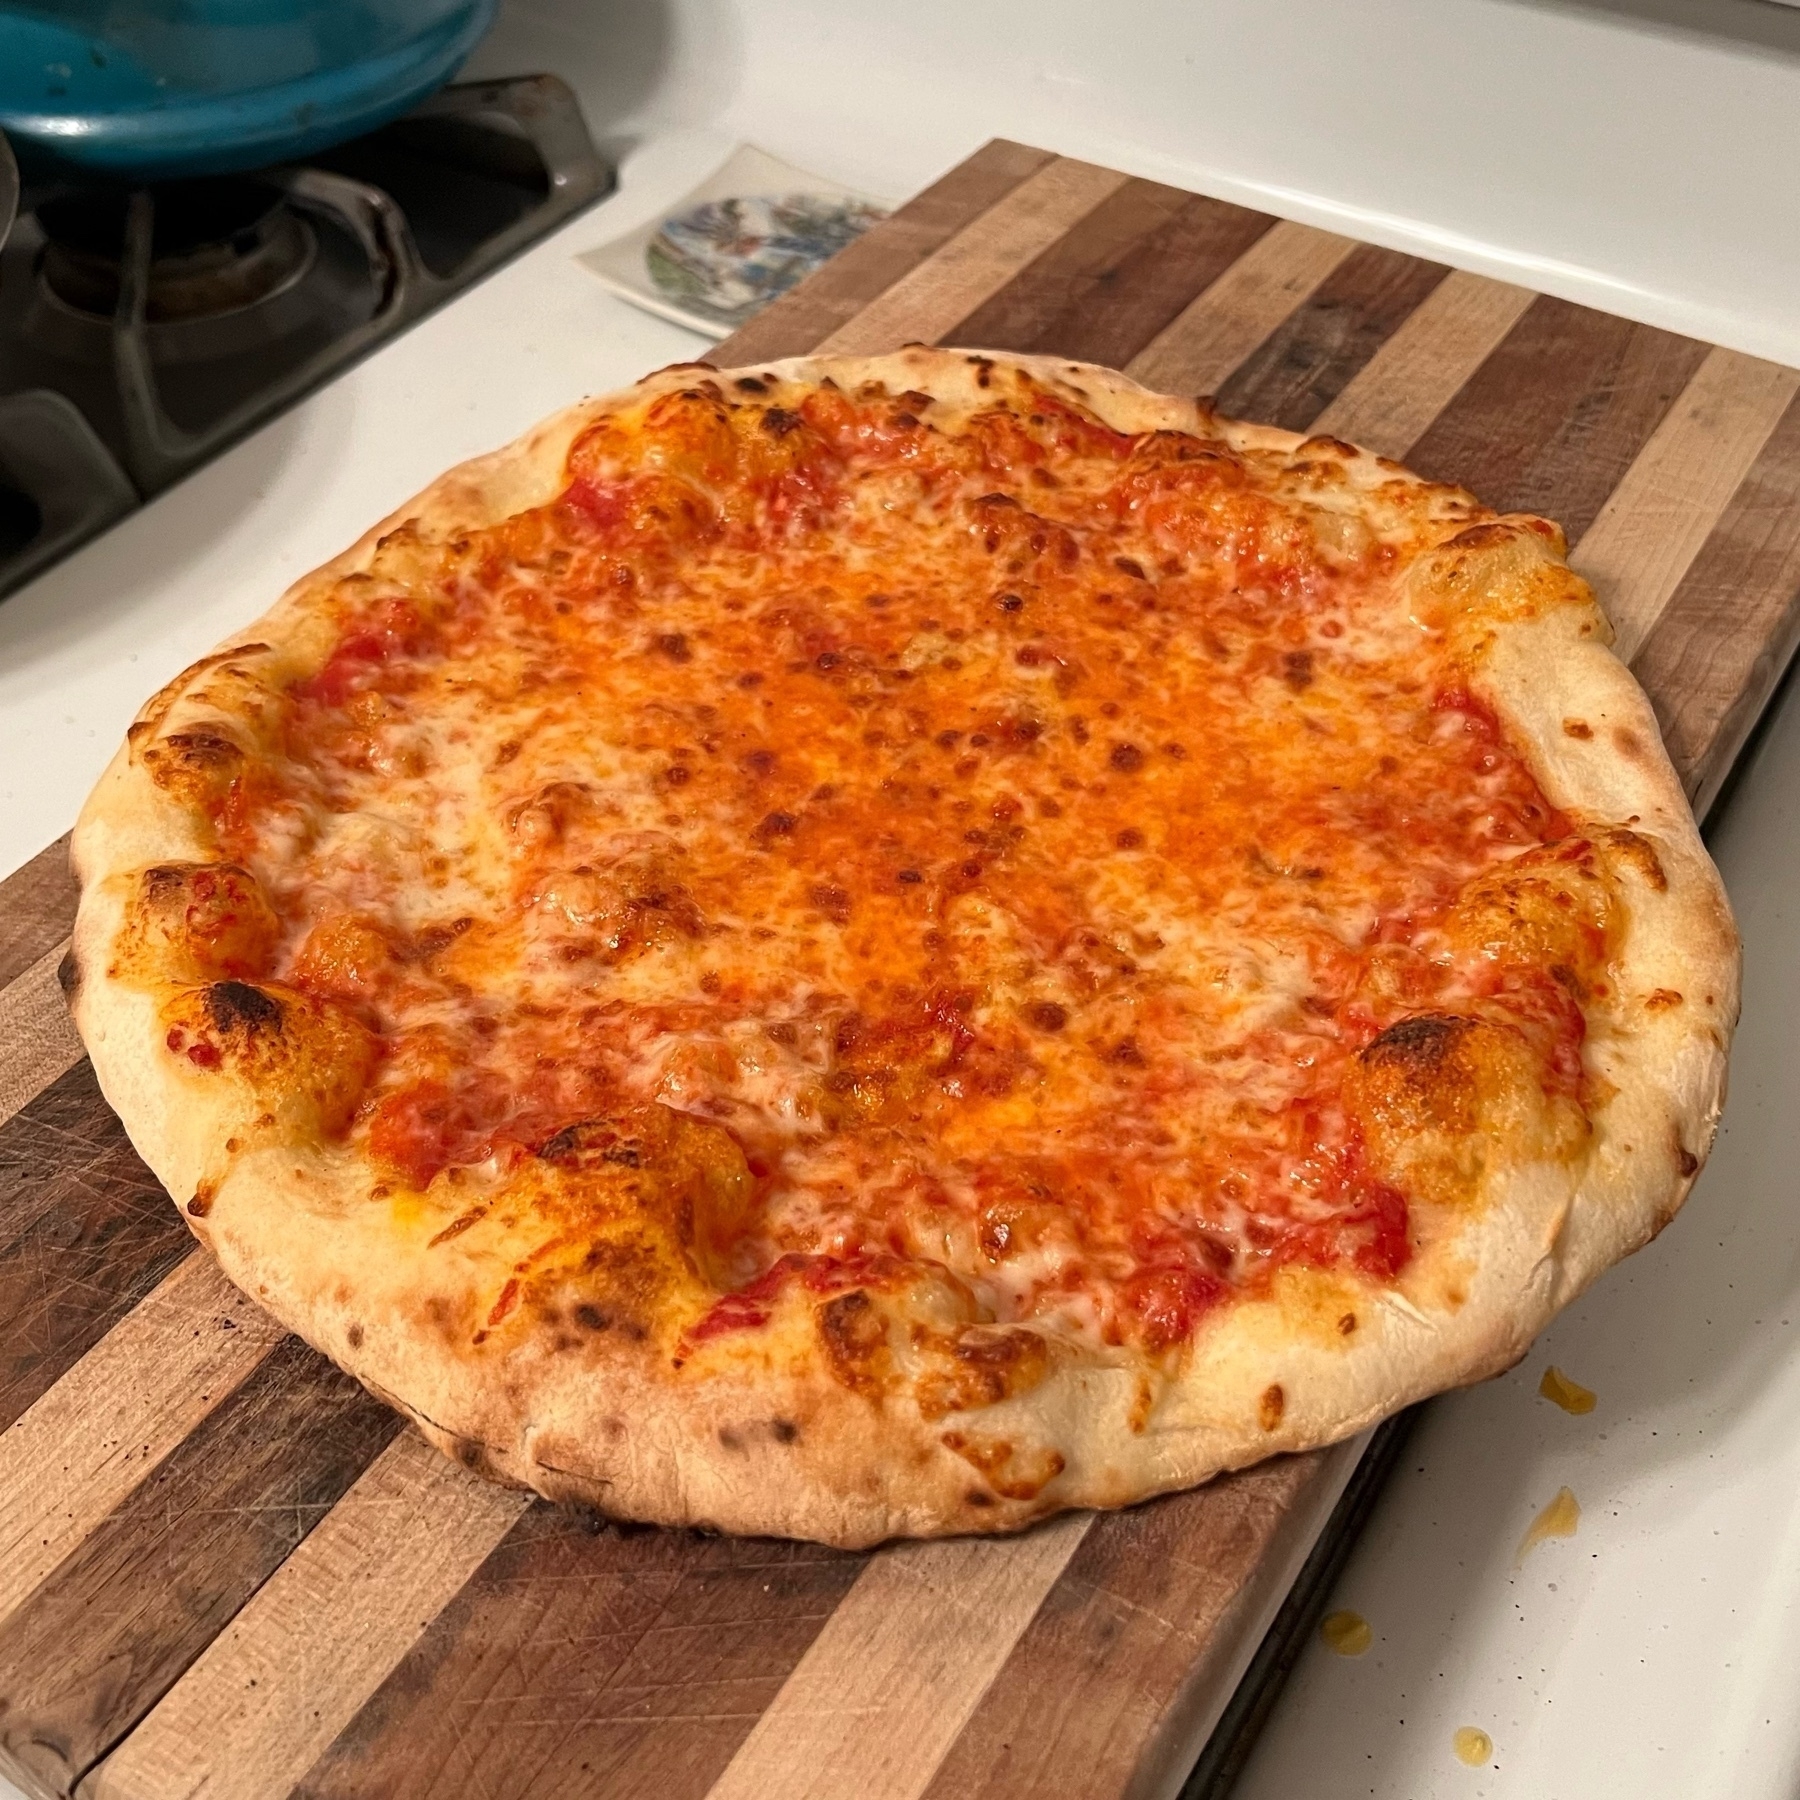 medium sized homemade cheese pizza with puffy crust, sitting on a wooden cutting board on a kitchen stove